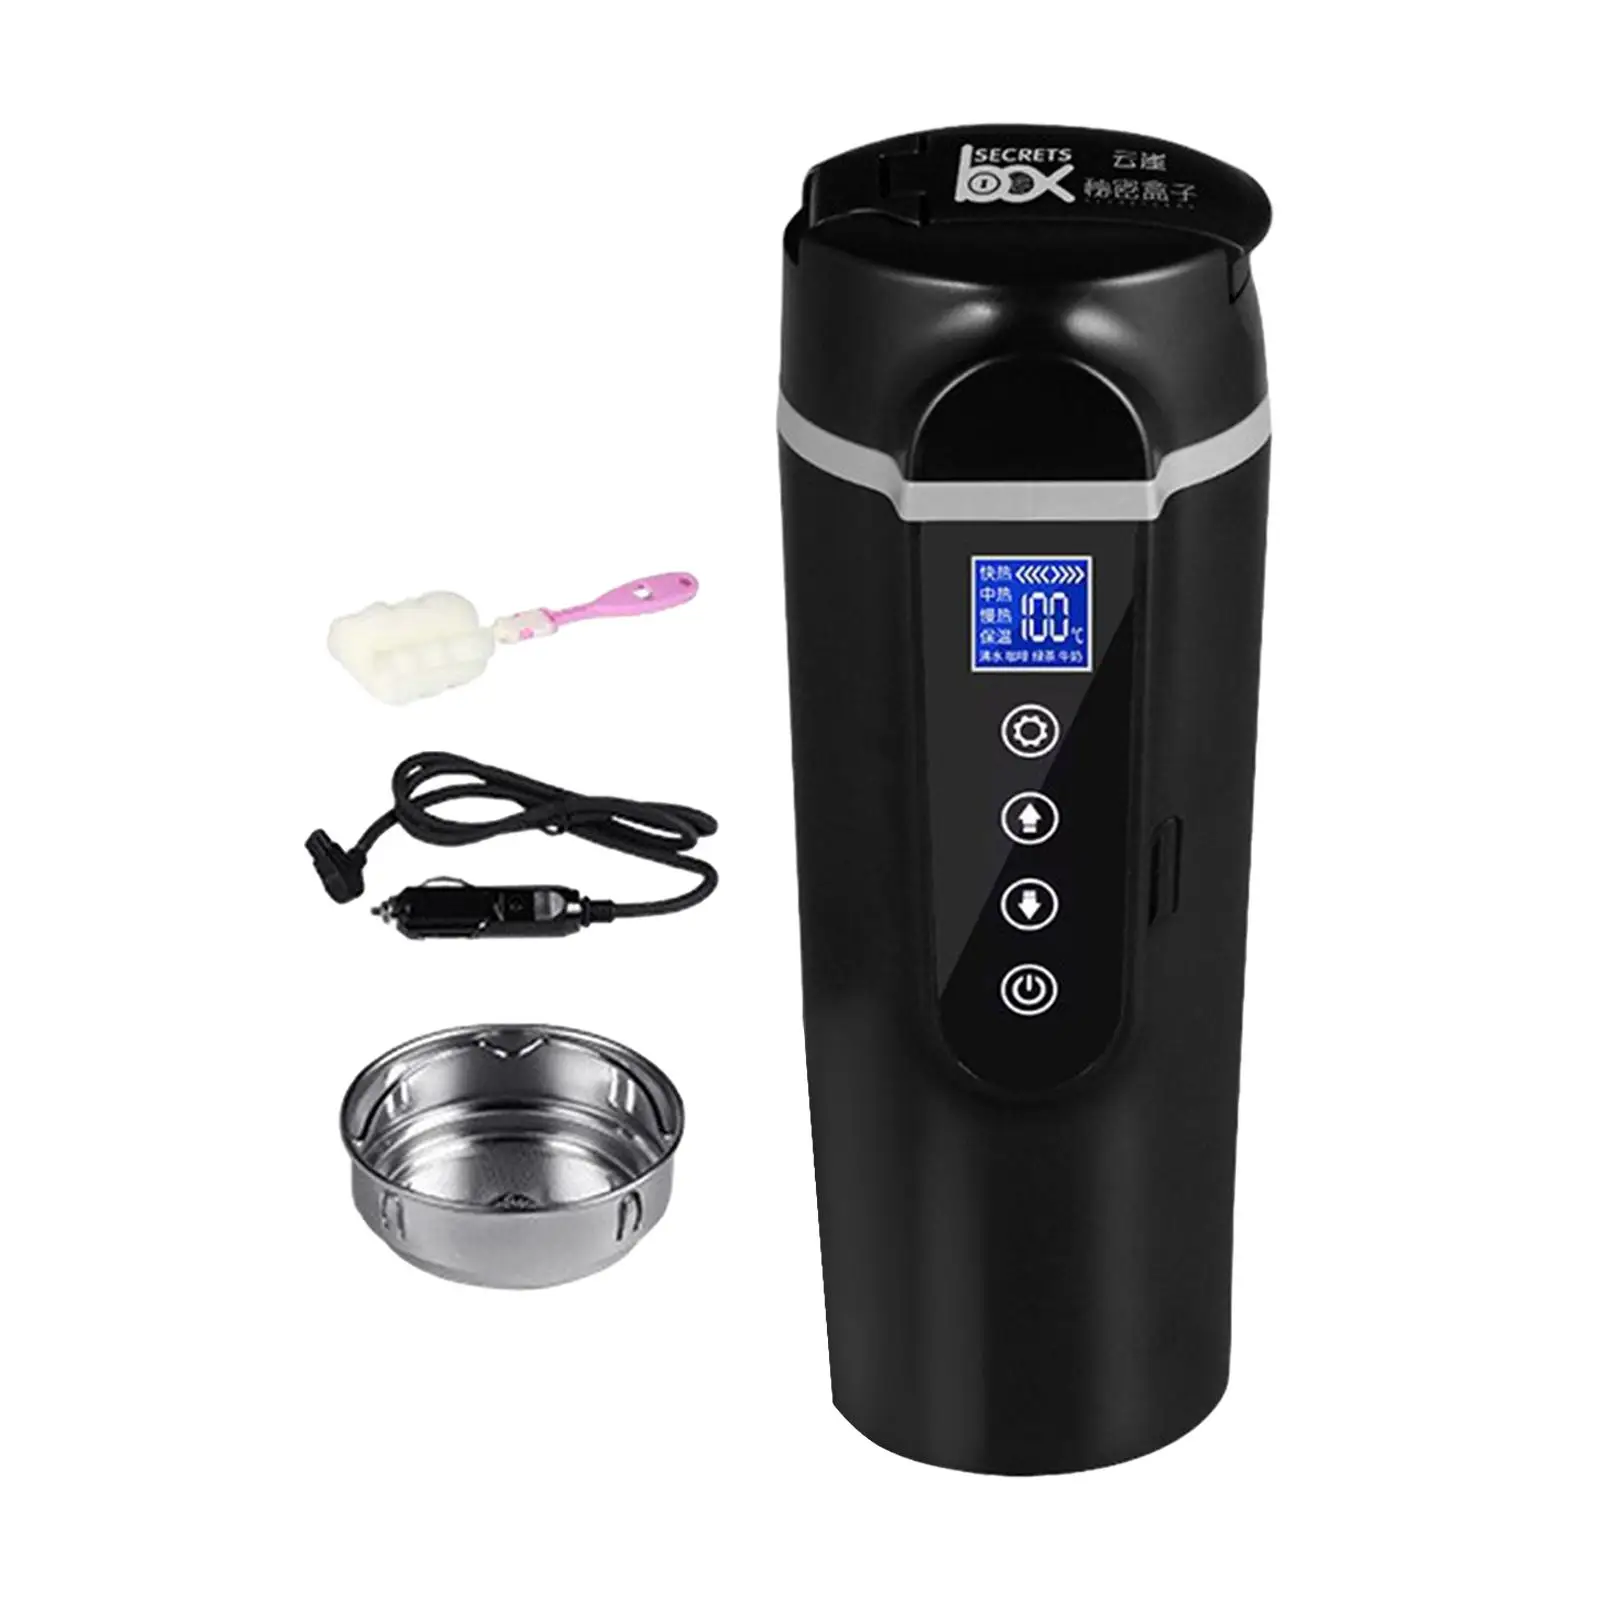 Car Heating Cup LED Display Electric Tea Kettle for Auto Car Trip Camping